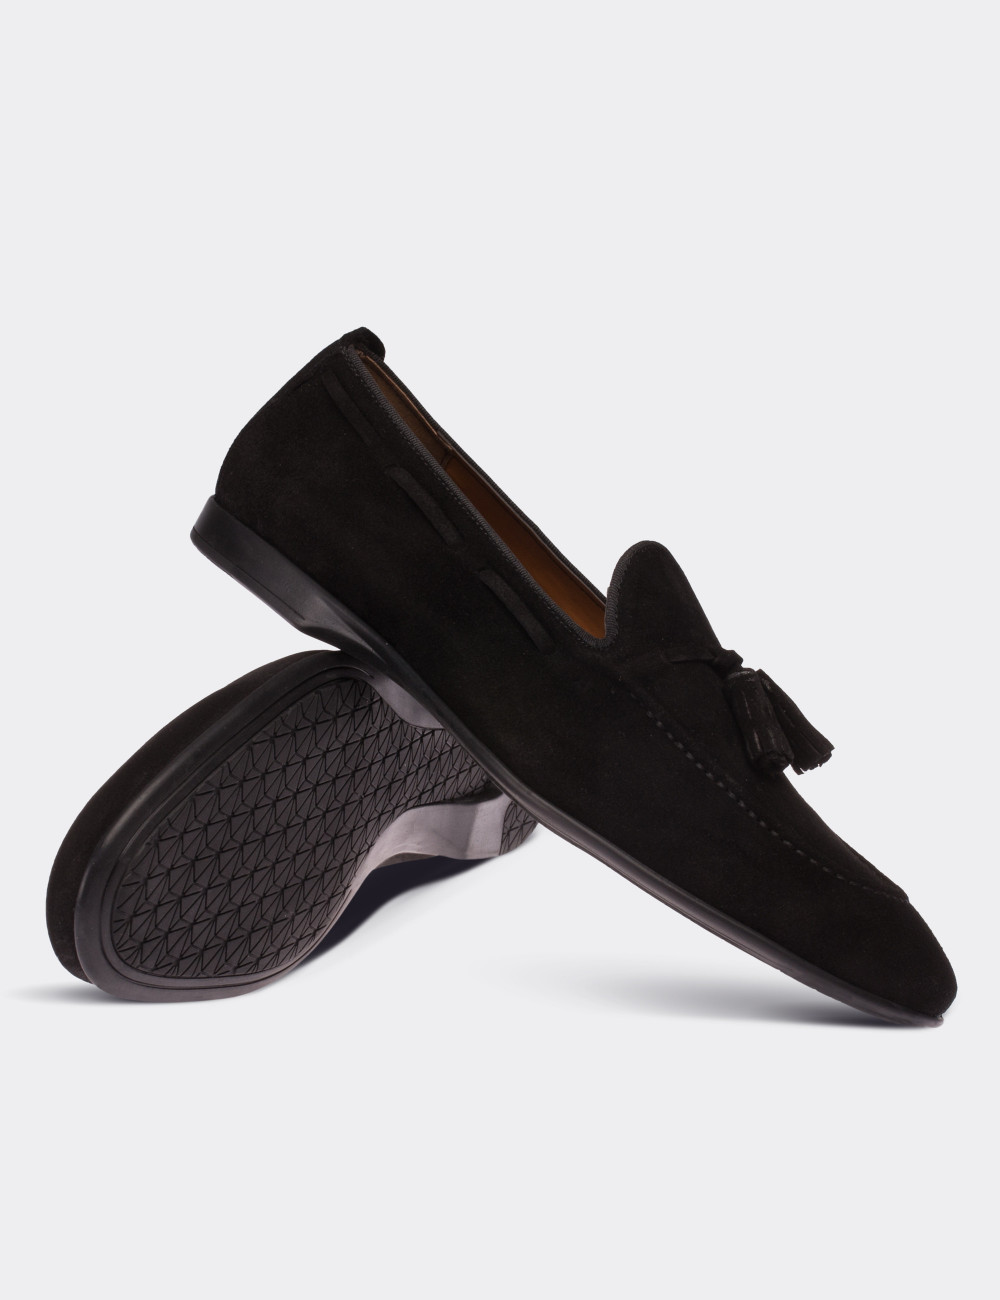 Black Suede Leather Loafers - 01642MSYHC01